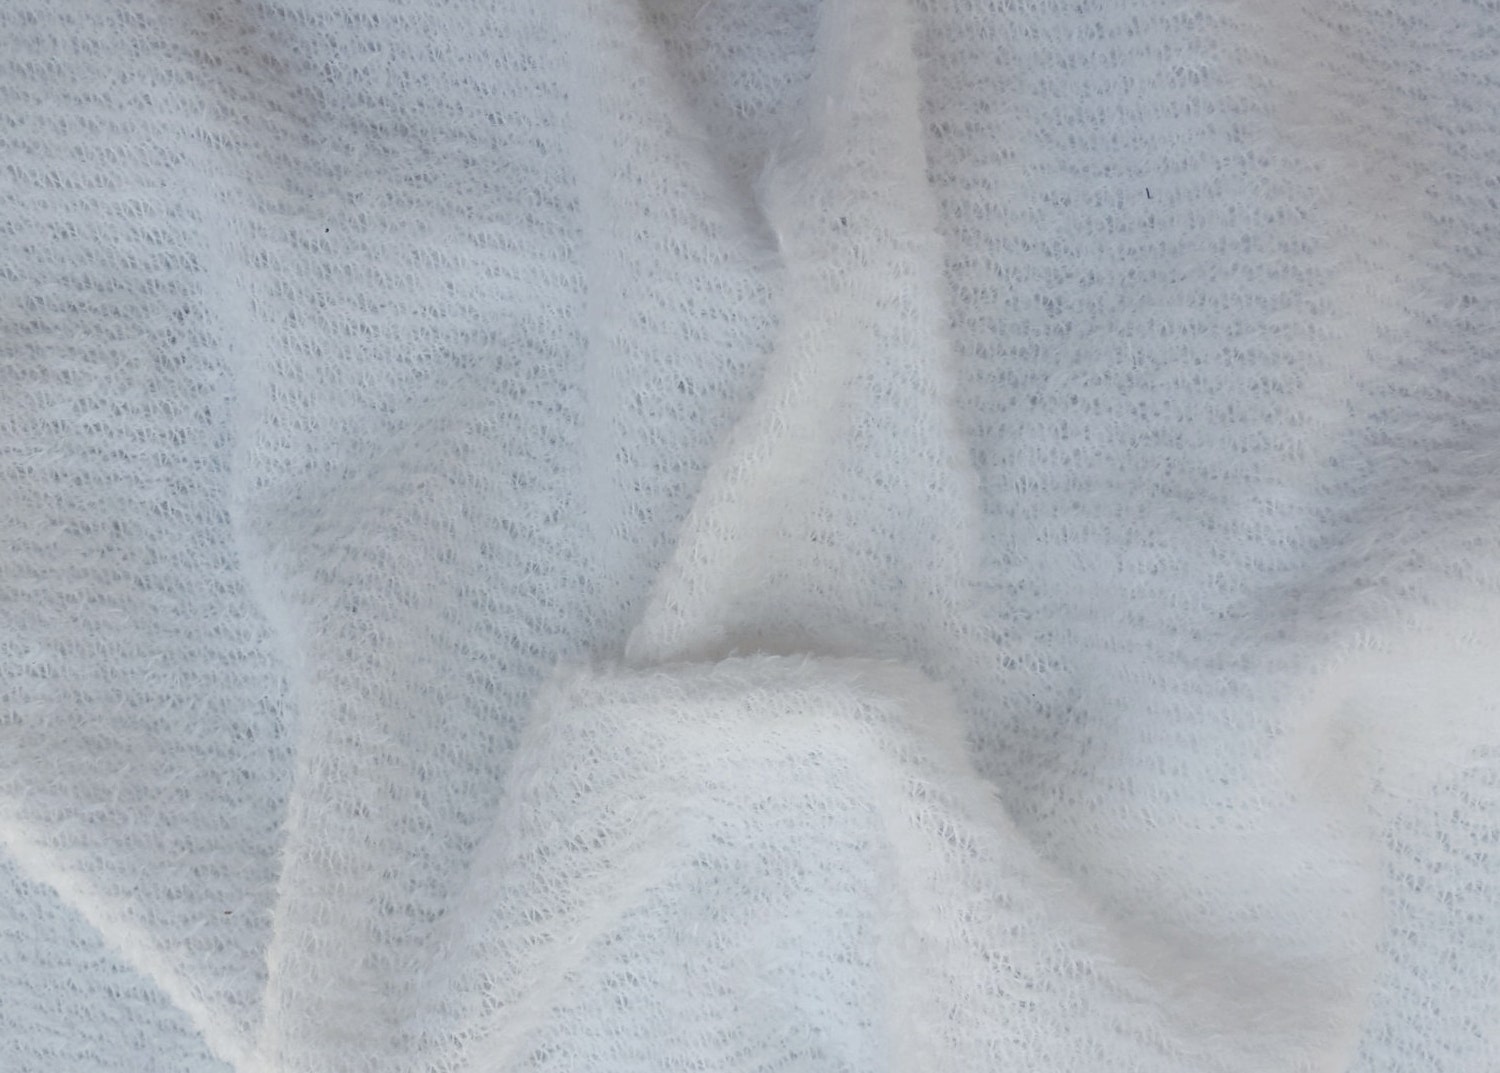 White Mohair Sweater Knit Fabric by the Yard 5/16 poncho - Etsy